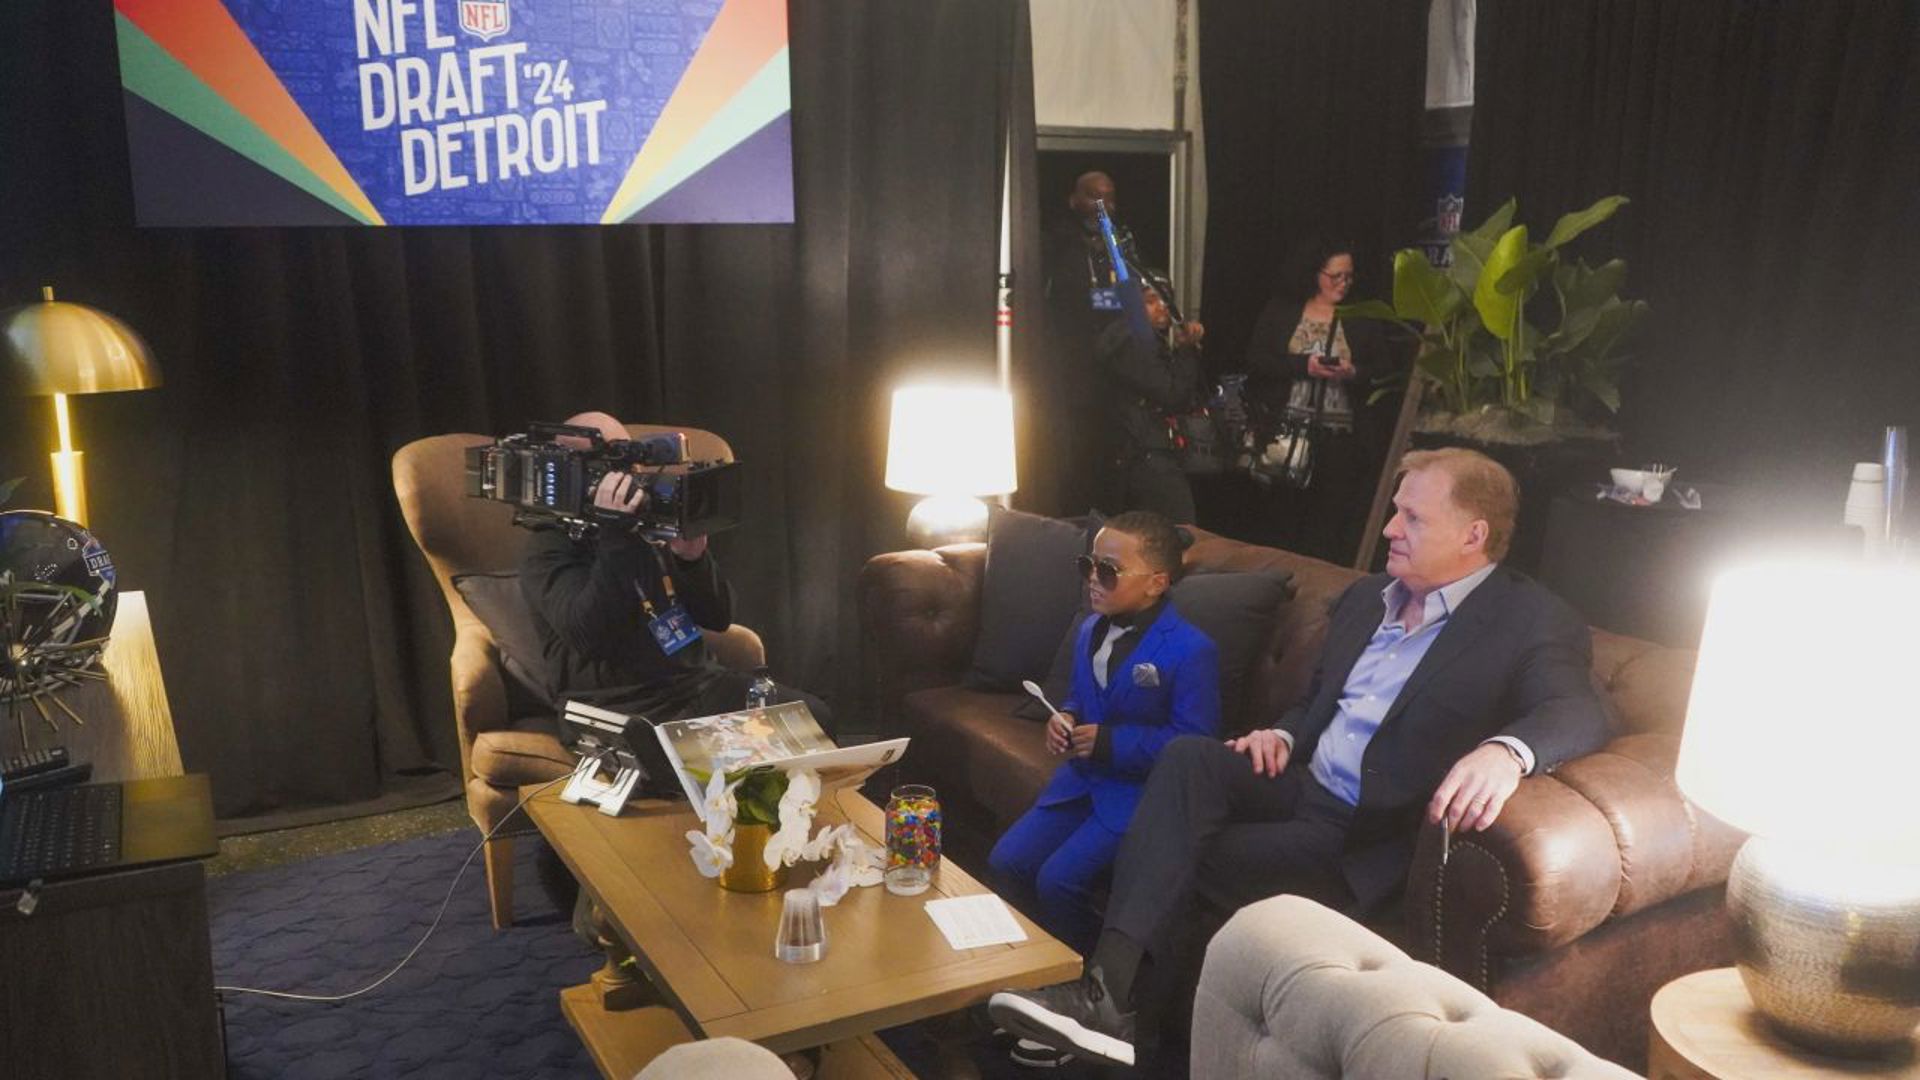 The Dauphin County native was invited to be the personal guest of Goodell, getting exclusive draft access for the first night of the annual event.